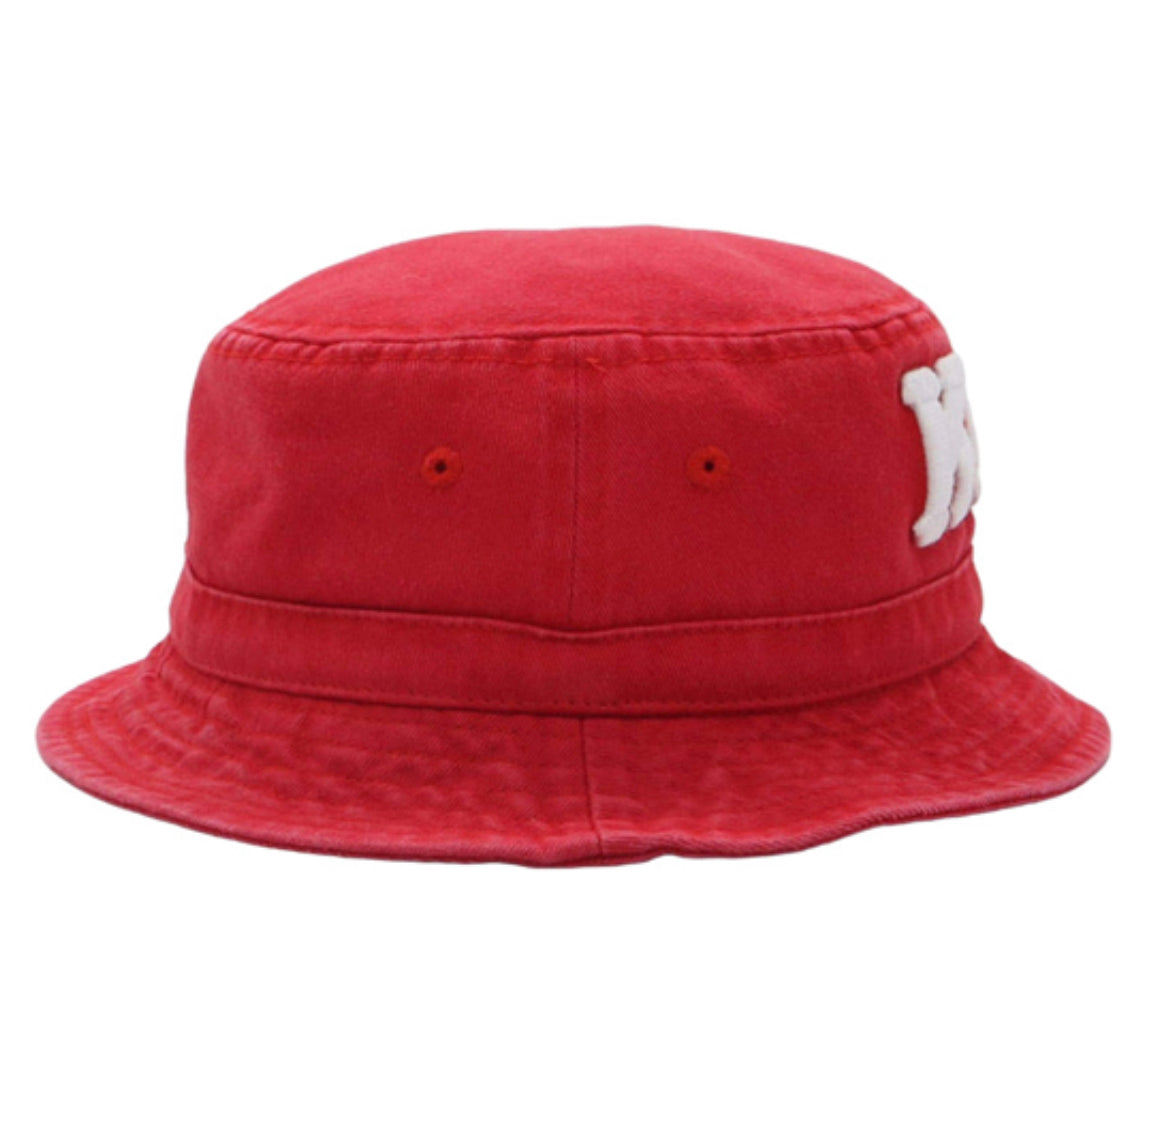 Crafted from high-quality materials, this hat is built to last and will keep its shape even after multiple wears. Whether you're lounging by the pool or hitting the streets, this hat will keep you looking sharp and feeling comfortable. Don't miss out on the chance to show your pride in style - add this Kappa Alpha Psi bucket hat to your collection today!

